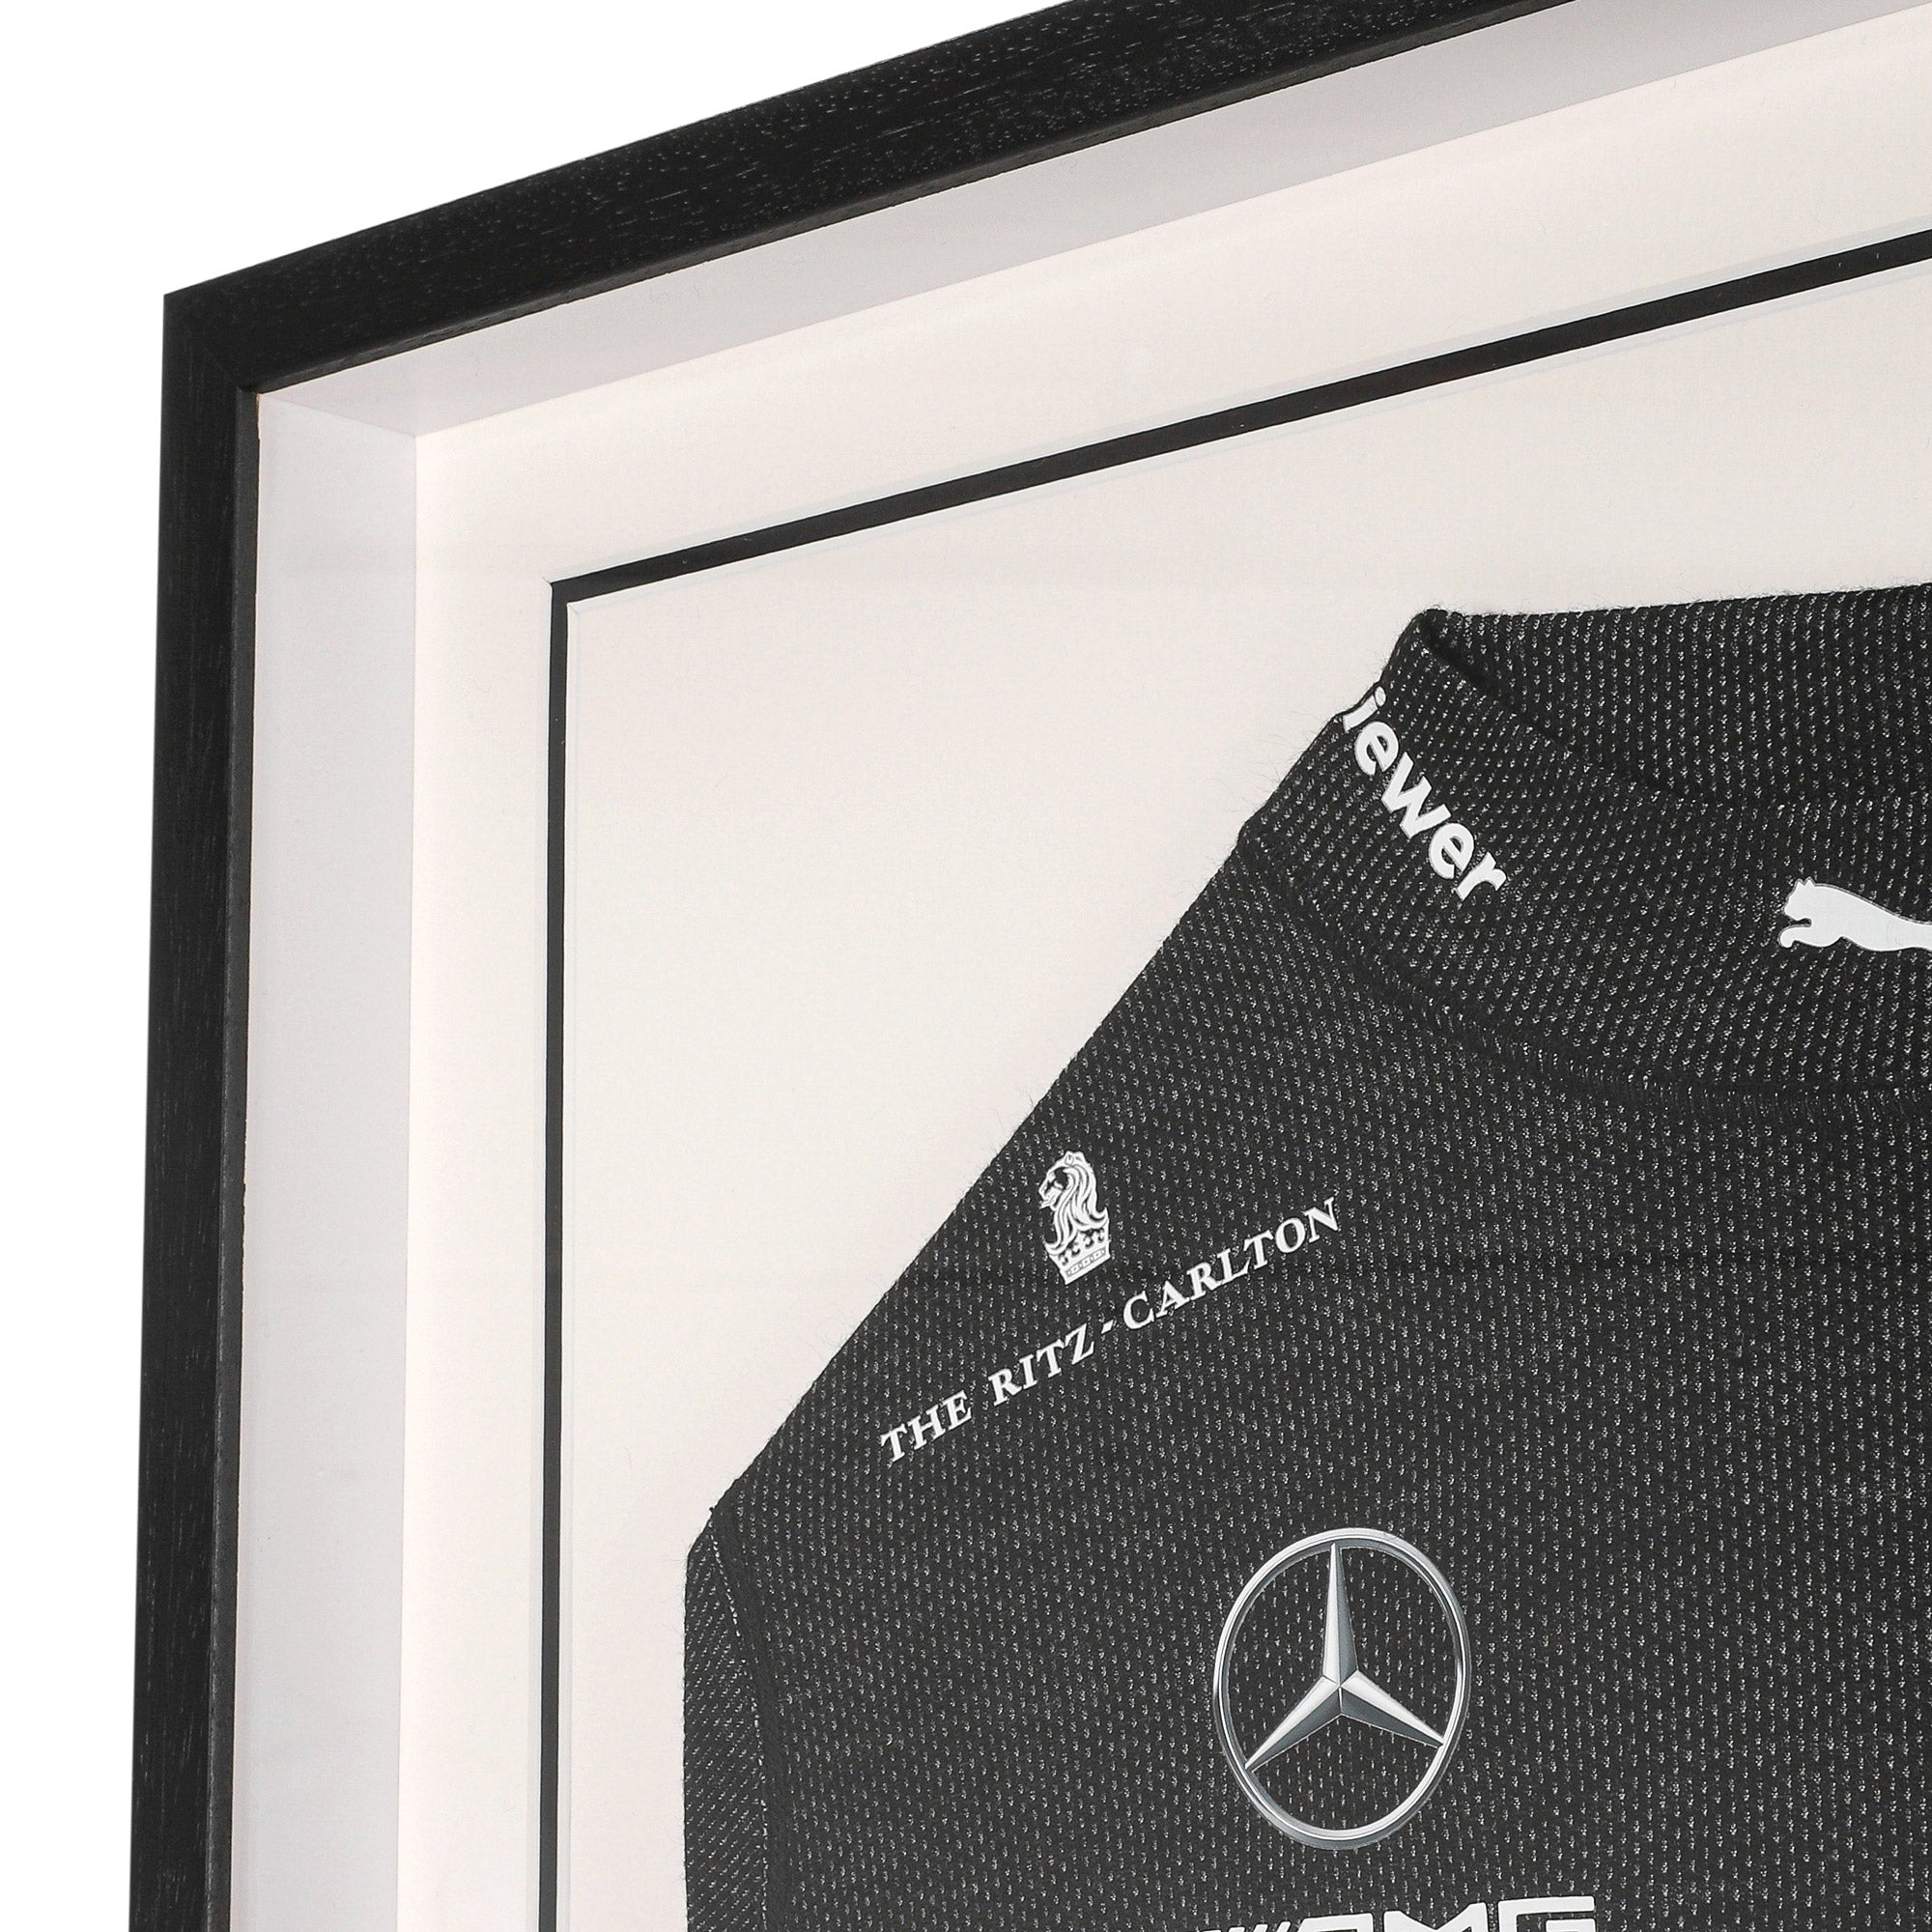 Officially Licensed 2023 Mercedes-AMG Petronas F1 Team Nomex Top - Lewis Hamilton Edition